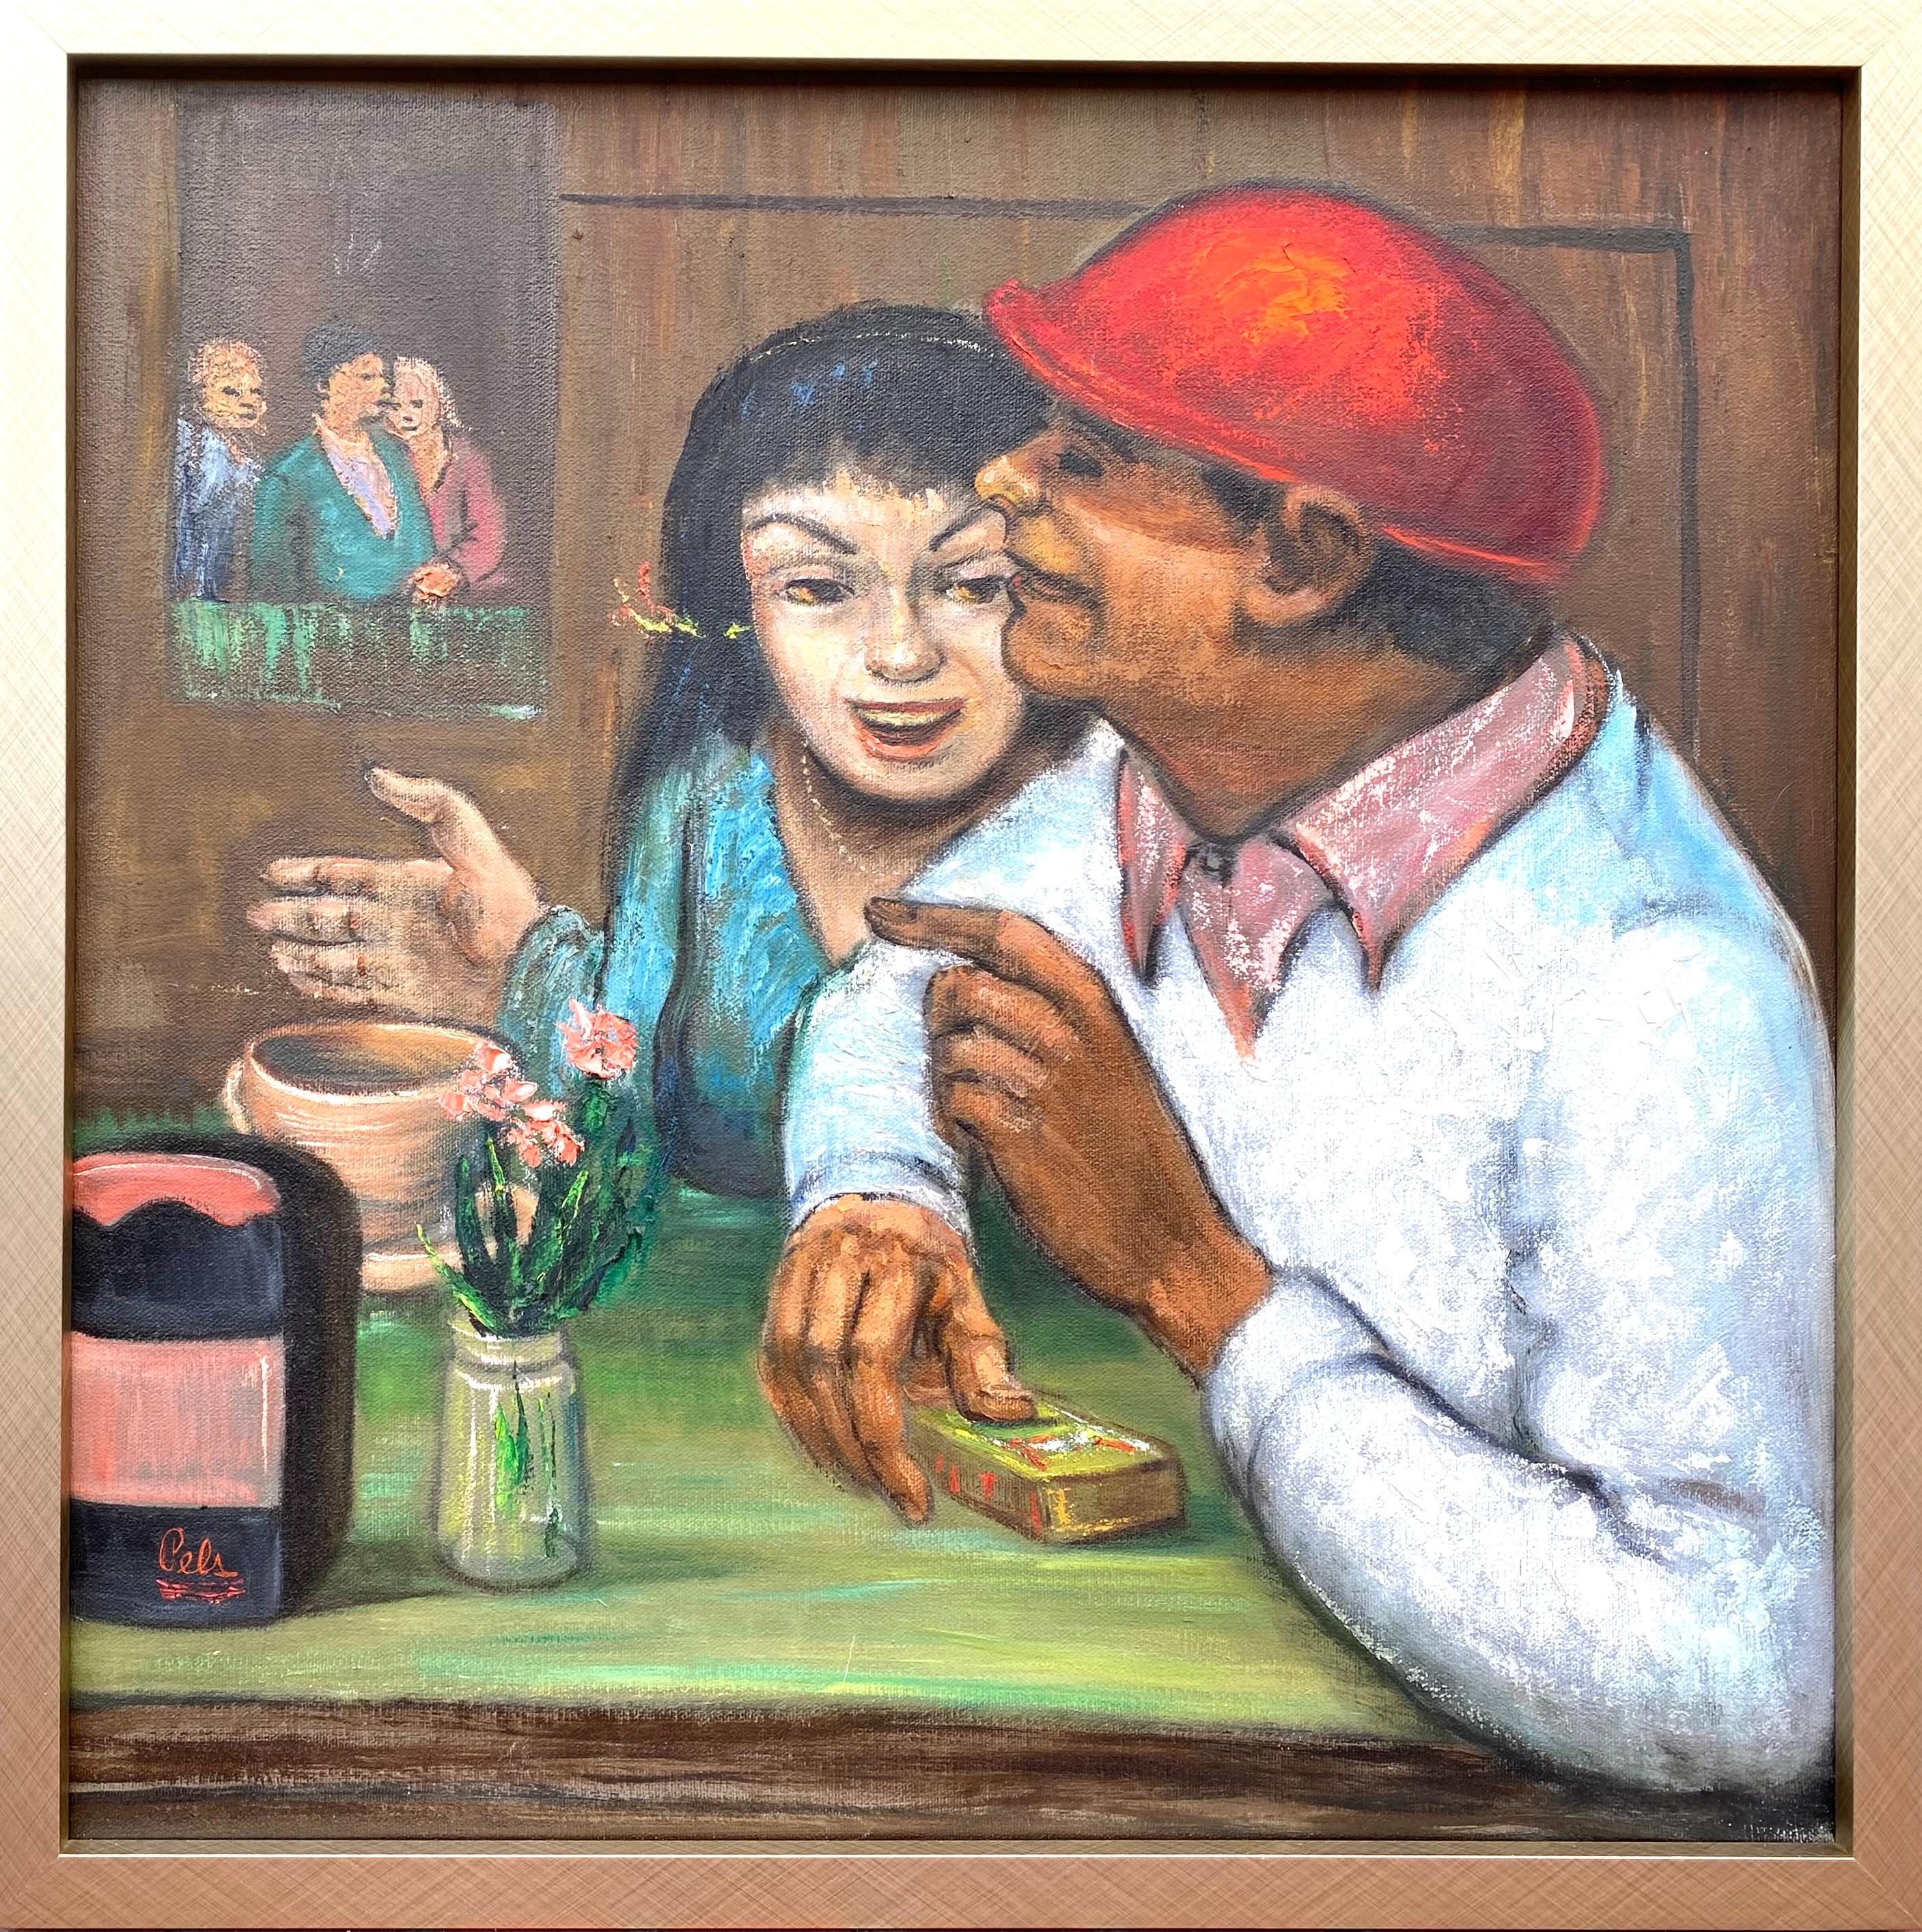 Original oil on canvas painting of a figurative interior scene by the American artist, Albert Pels.  Signed lower right.  Circa 1980. Condition is excellent.  The painting is housed in a one inch wide new gold leaf gallery frame. Overall framed